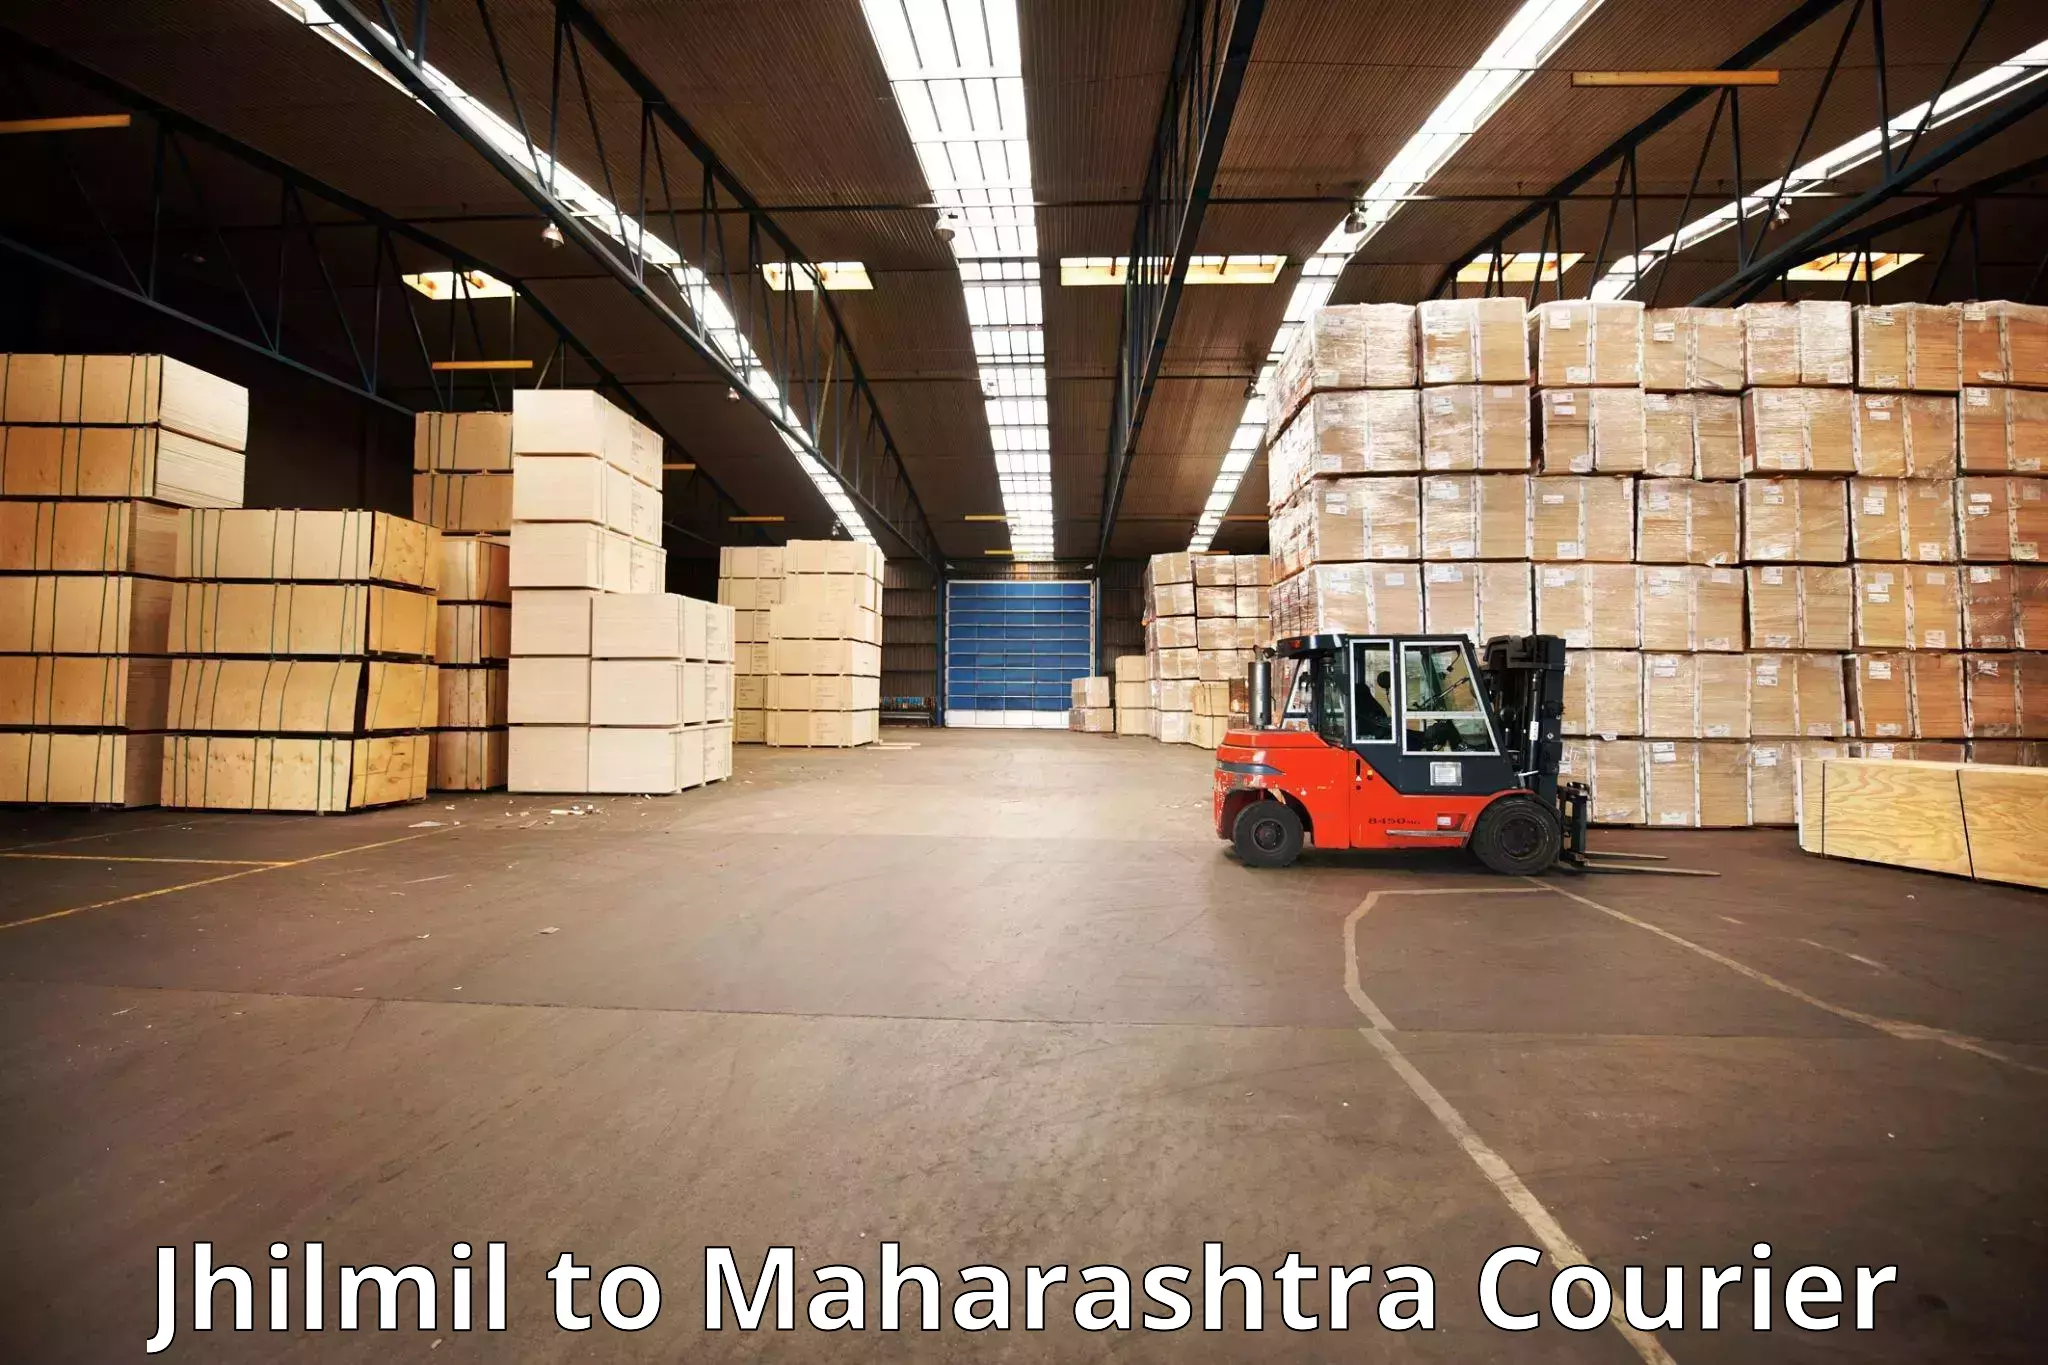 Baggage shipping experience Jhilmil to Ahmednagar